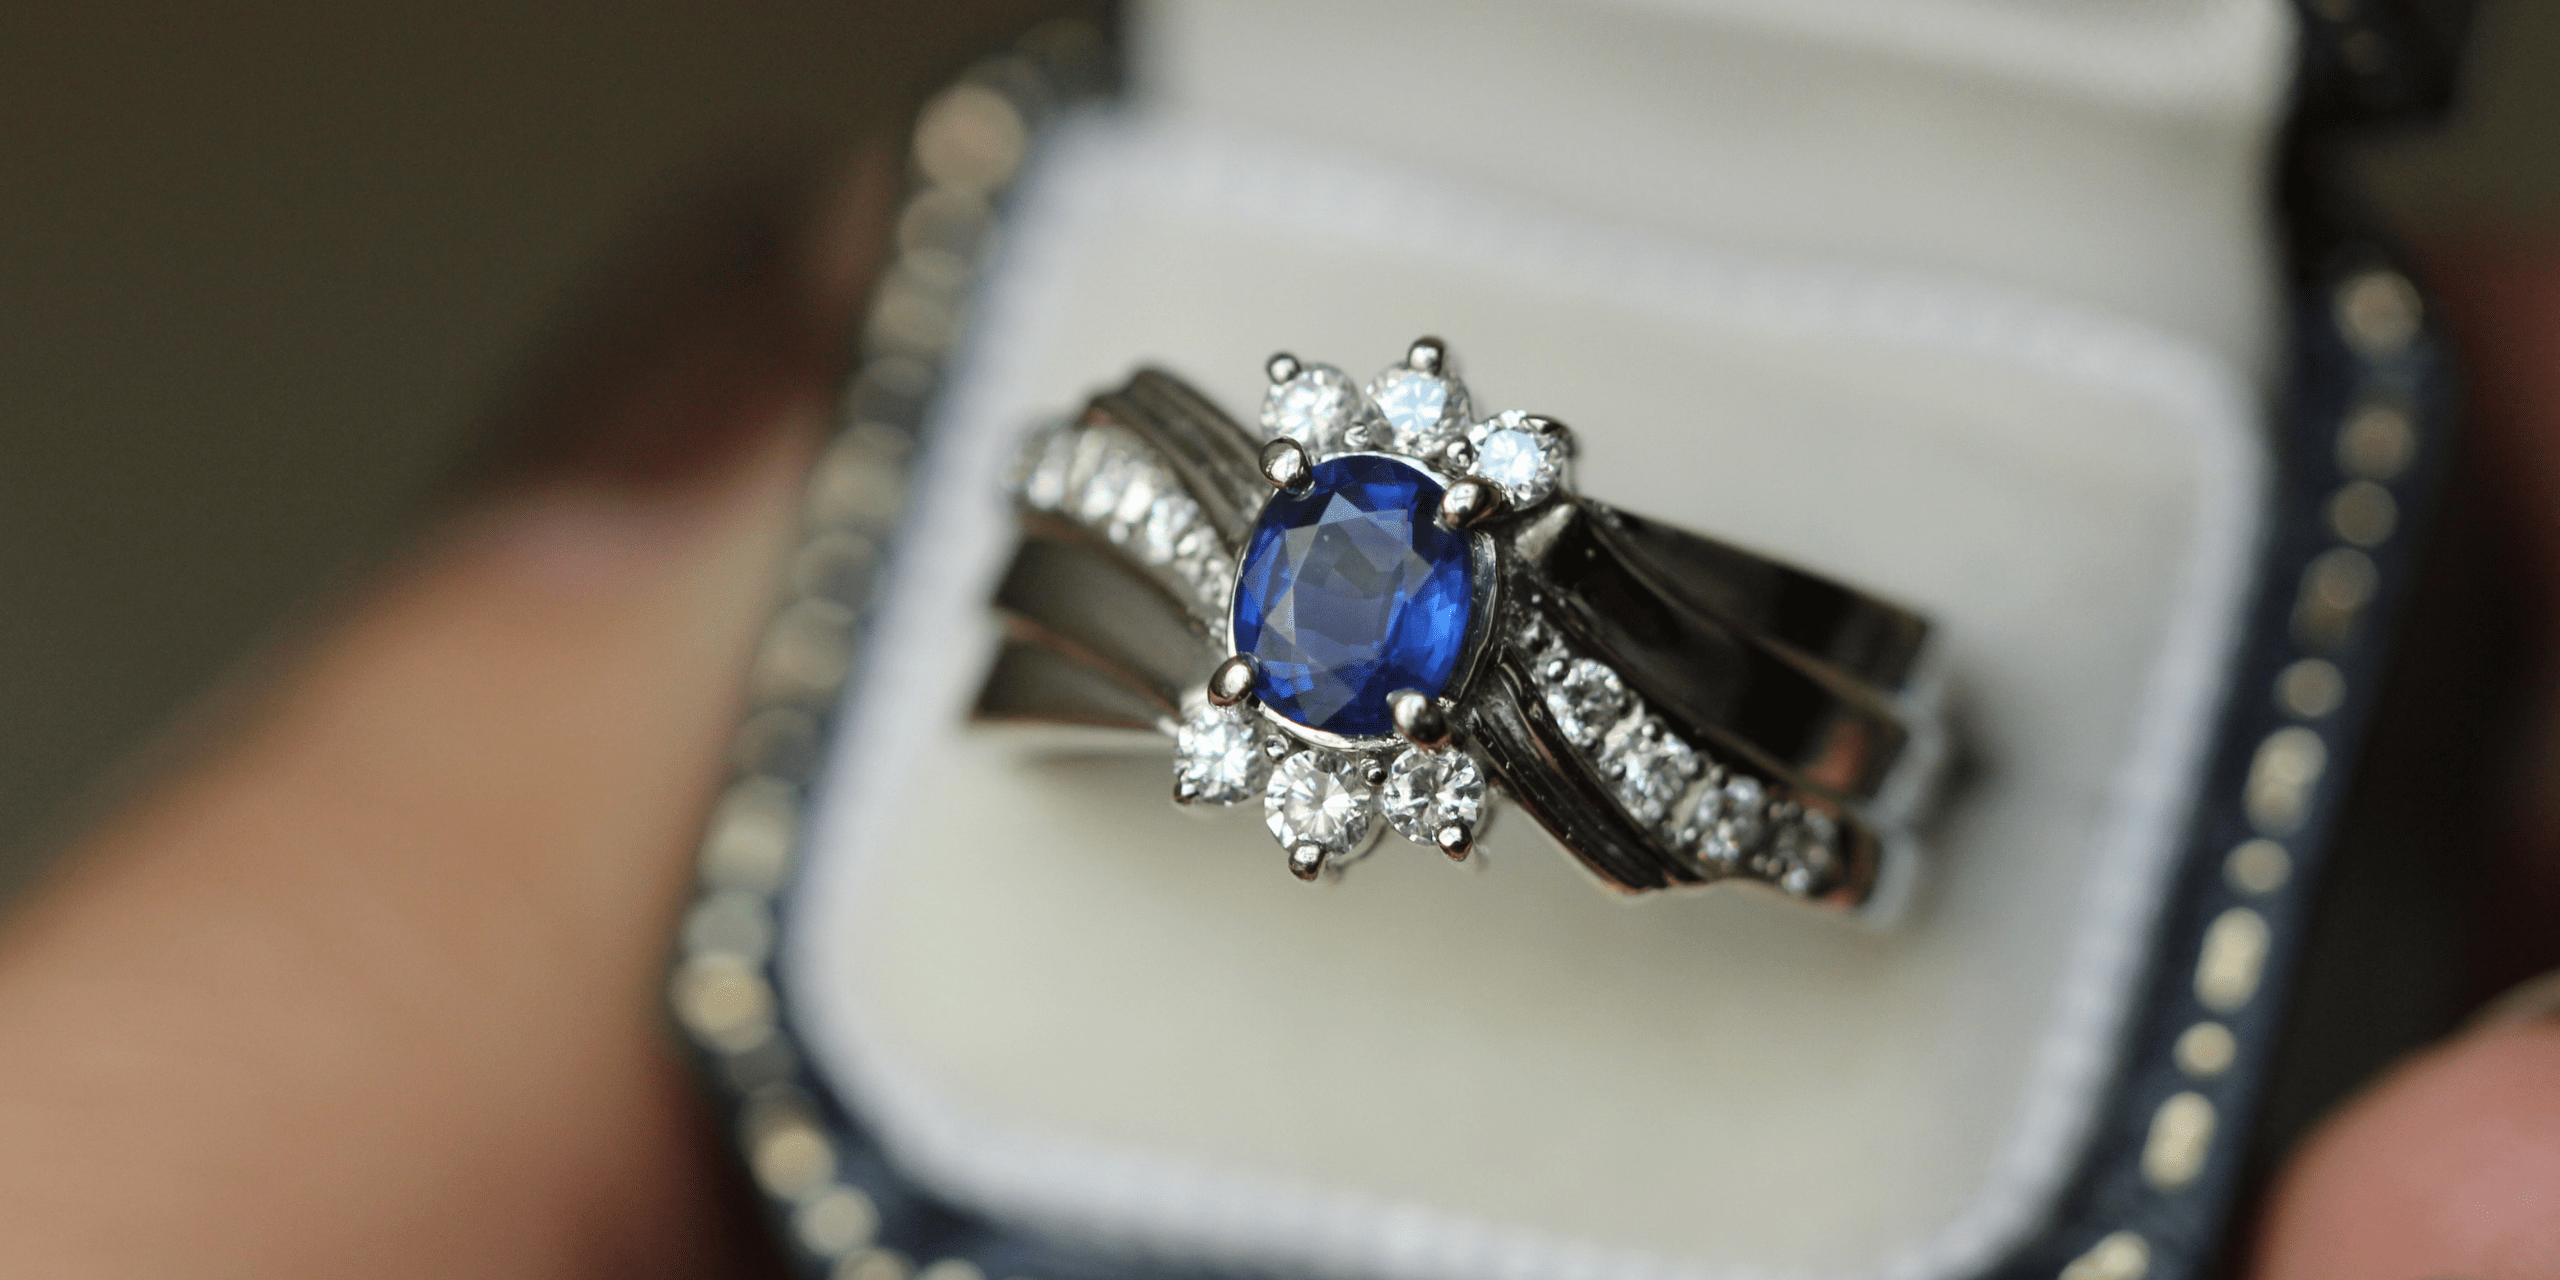 buying engagement ring guide featured image